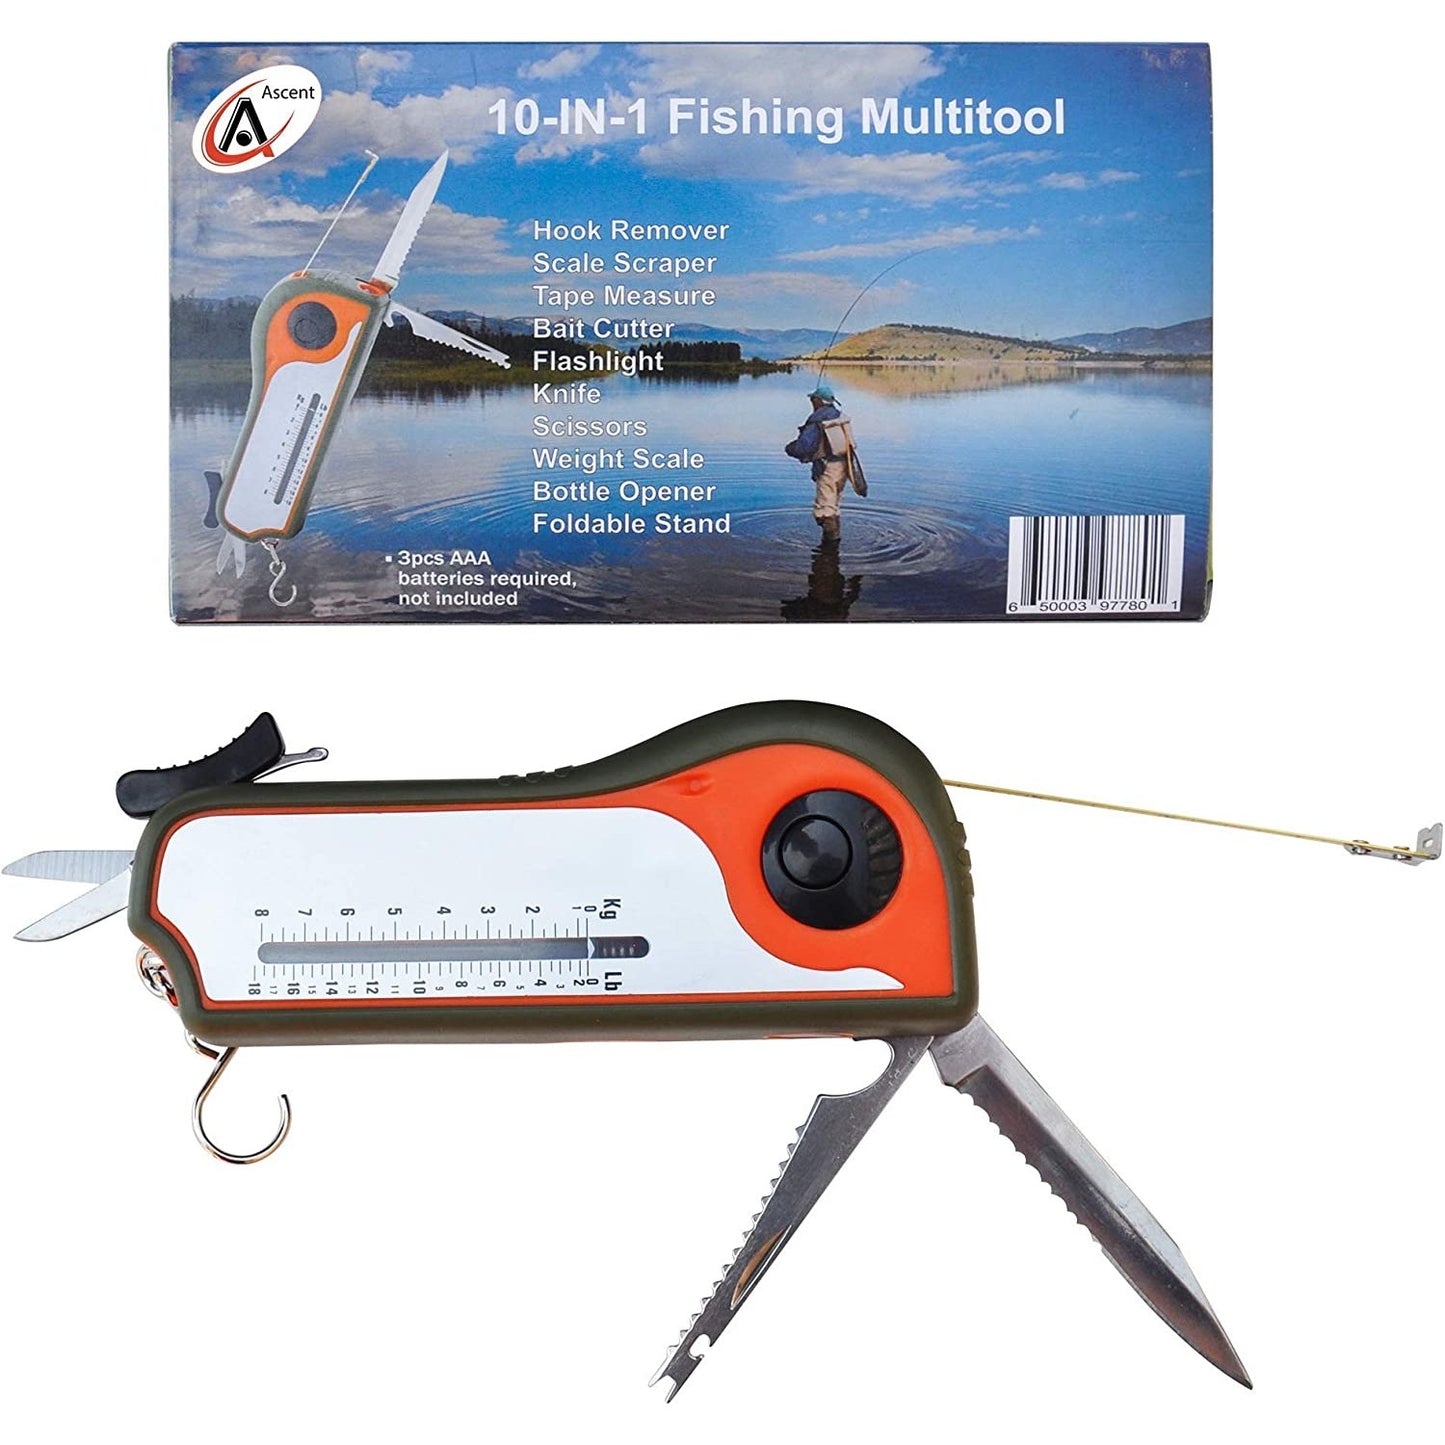 A 10-in-1 fishing multitool as well as the packaging for the item.